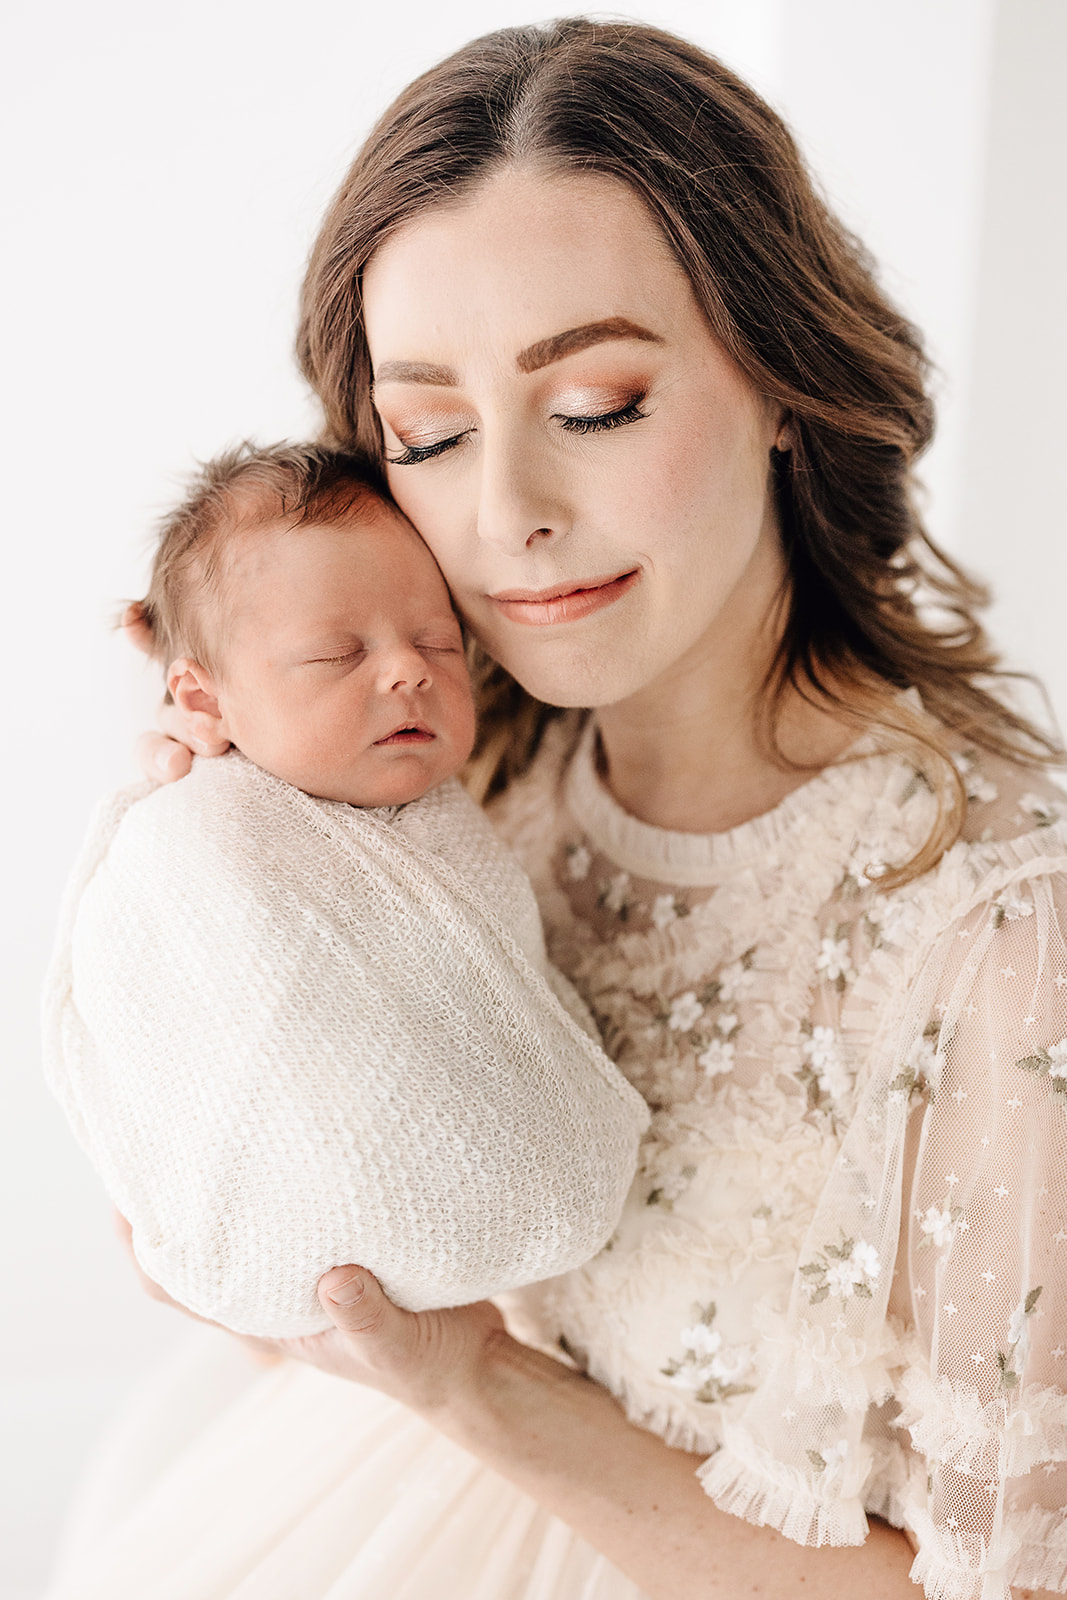 A mother in a beige dress stands in a studio nuzzling her sleeping newborn baby to her cheek